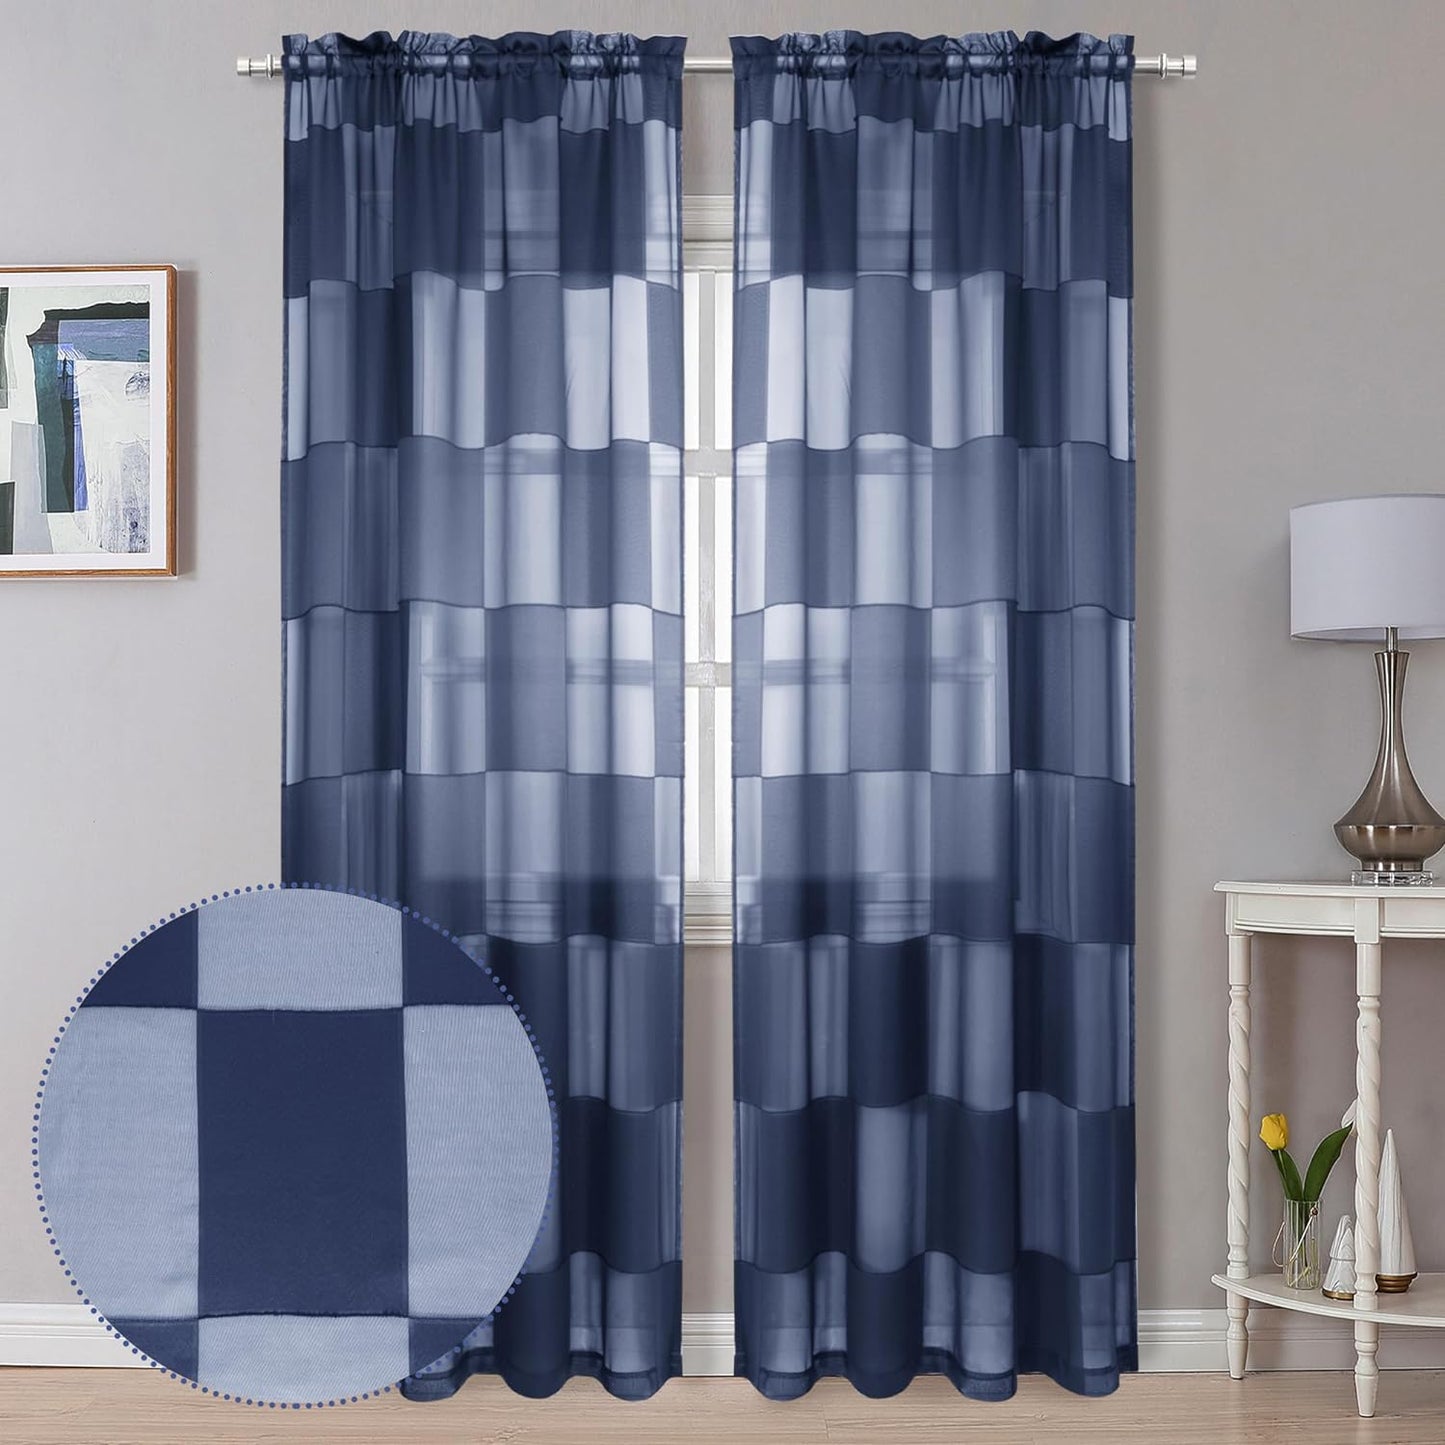 OVZME Sage Green Sheer Bedroom Curtains 84 Inch Length 2 Panels Set, Dual Rod Pocket Clip Checkered Window Curtains for Living Room, Light Filtering & Privacy Sheer Green Drapes, Each 42W X 84L  OVZME Navy Blue 42W X 96L 